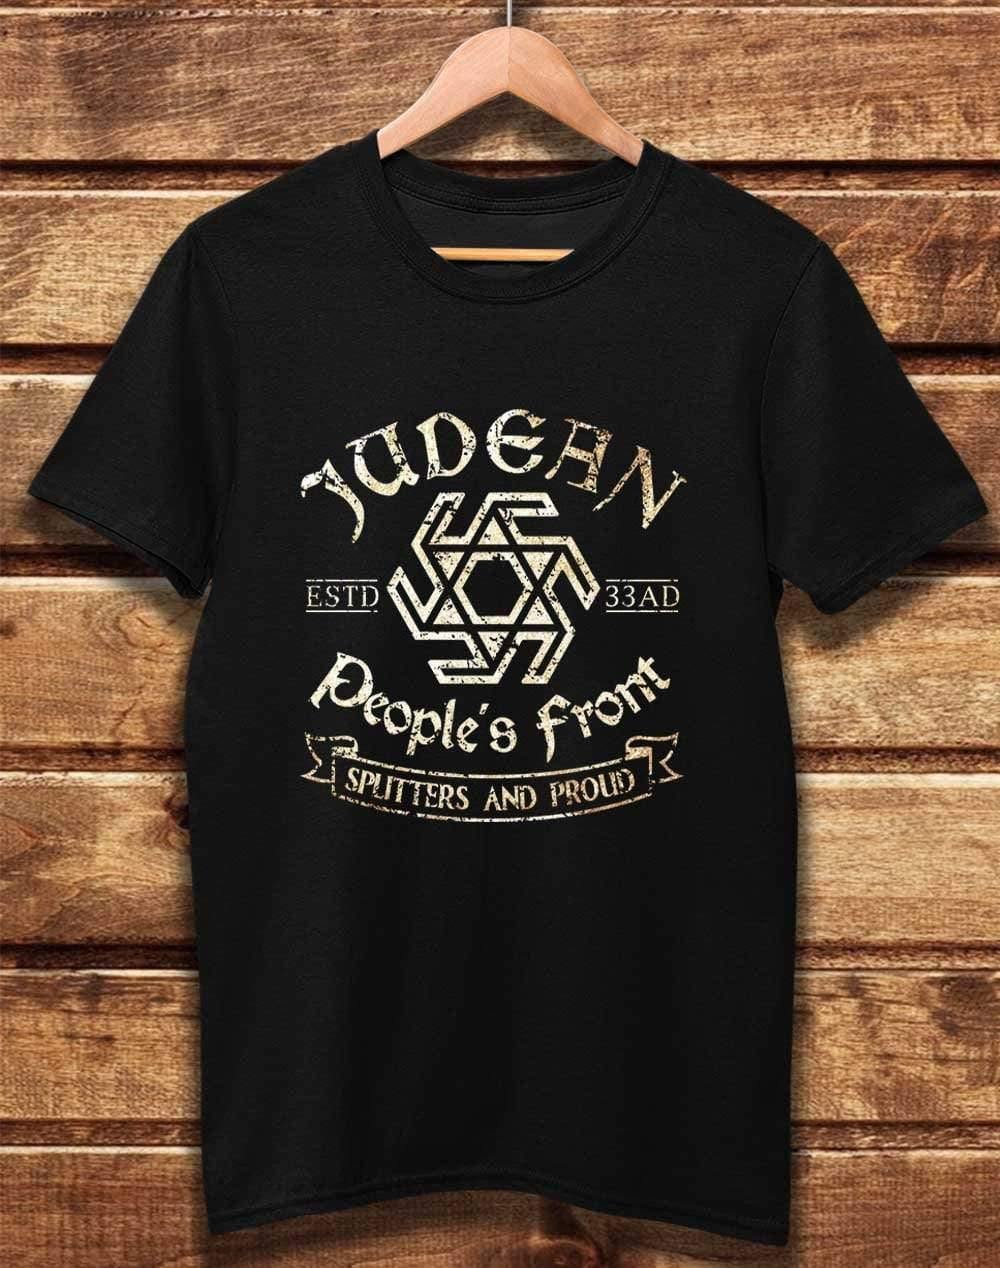 DELUXE Judean People's Front Organic Cotton T-Shirt XS / Black  - Off World Tees